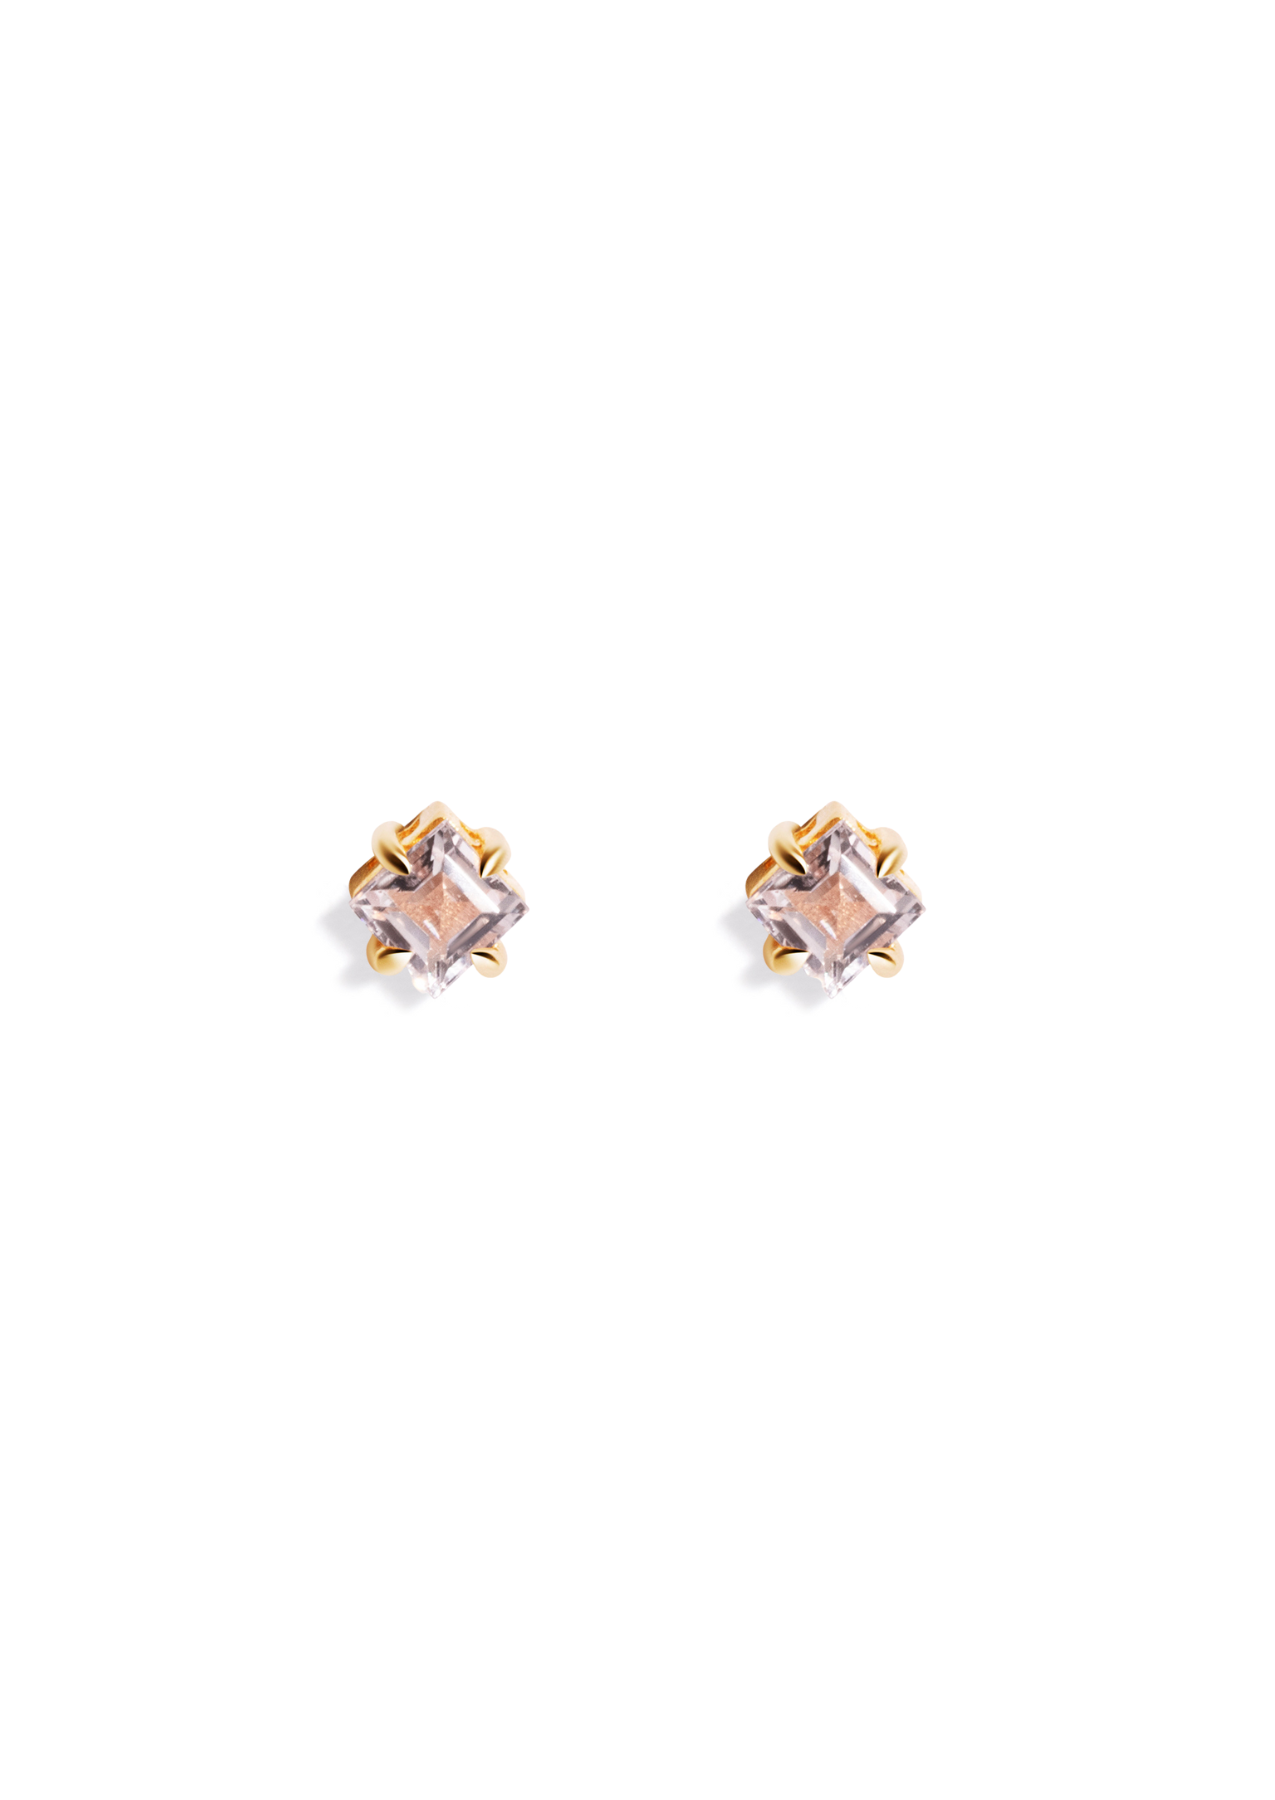 The Poppy Pink Morganite 9ct Solid Gold Stud Earrings